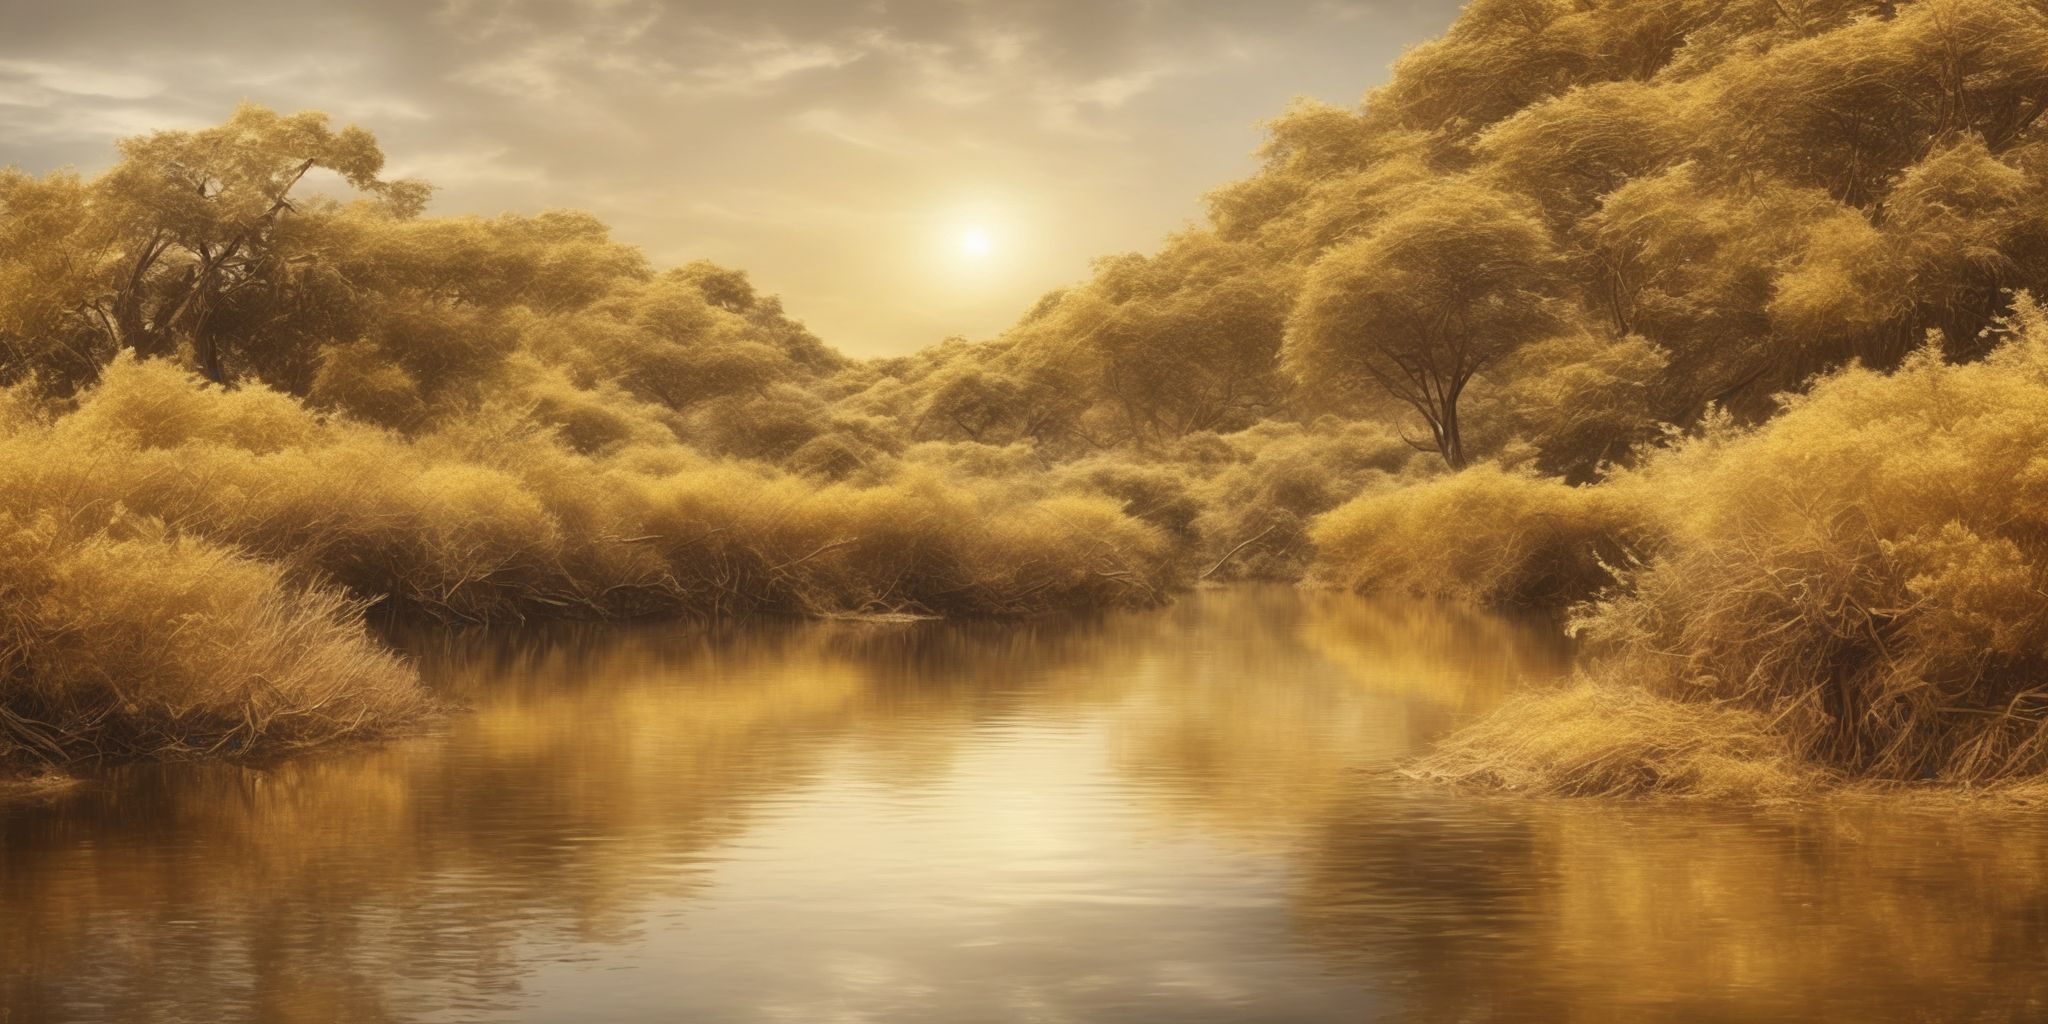 Golden opportunity  in realistic, photographic style